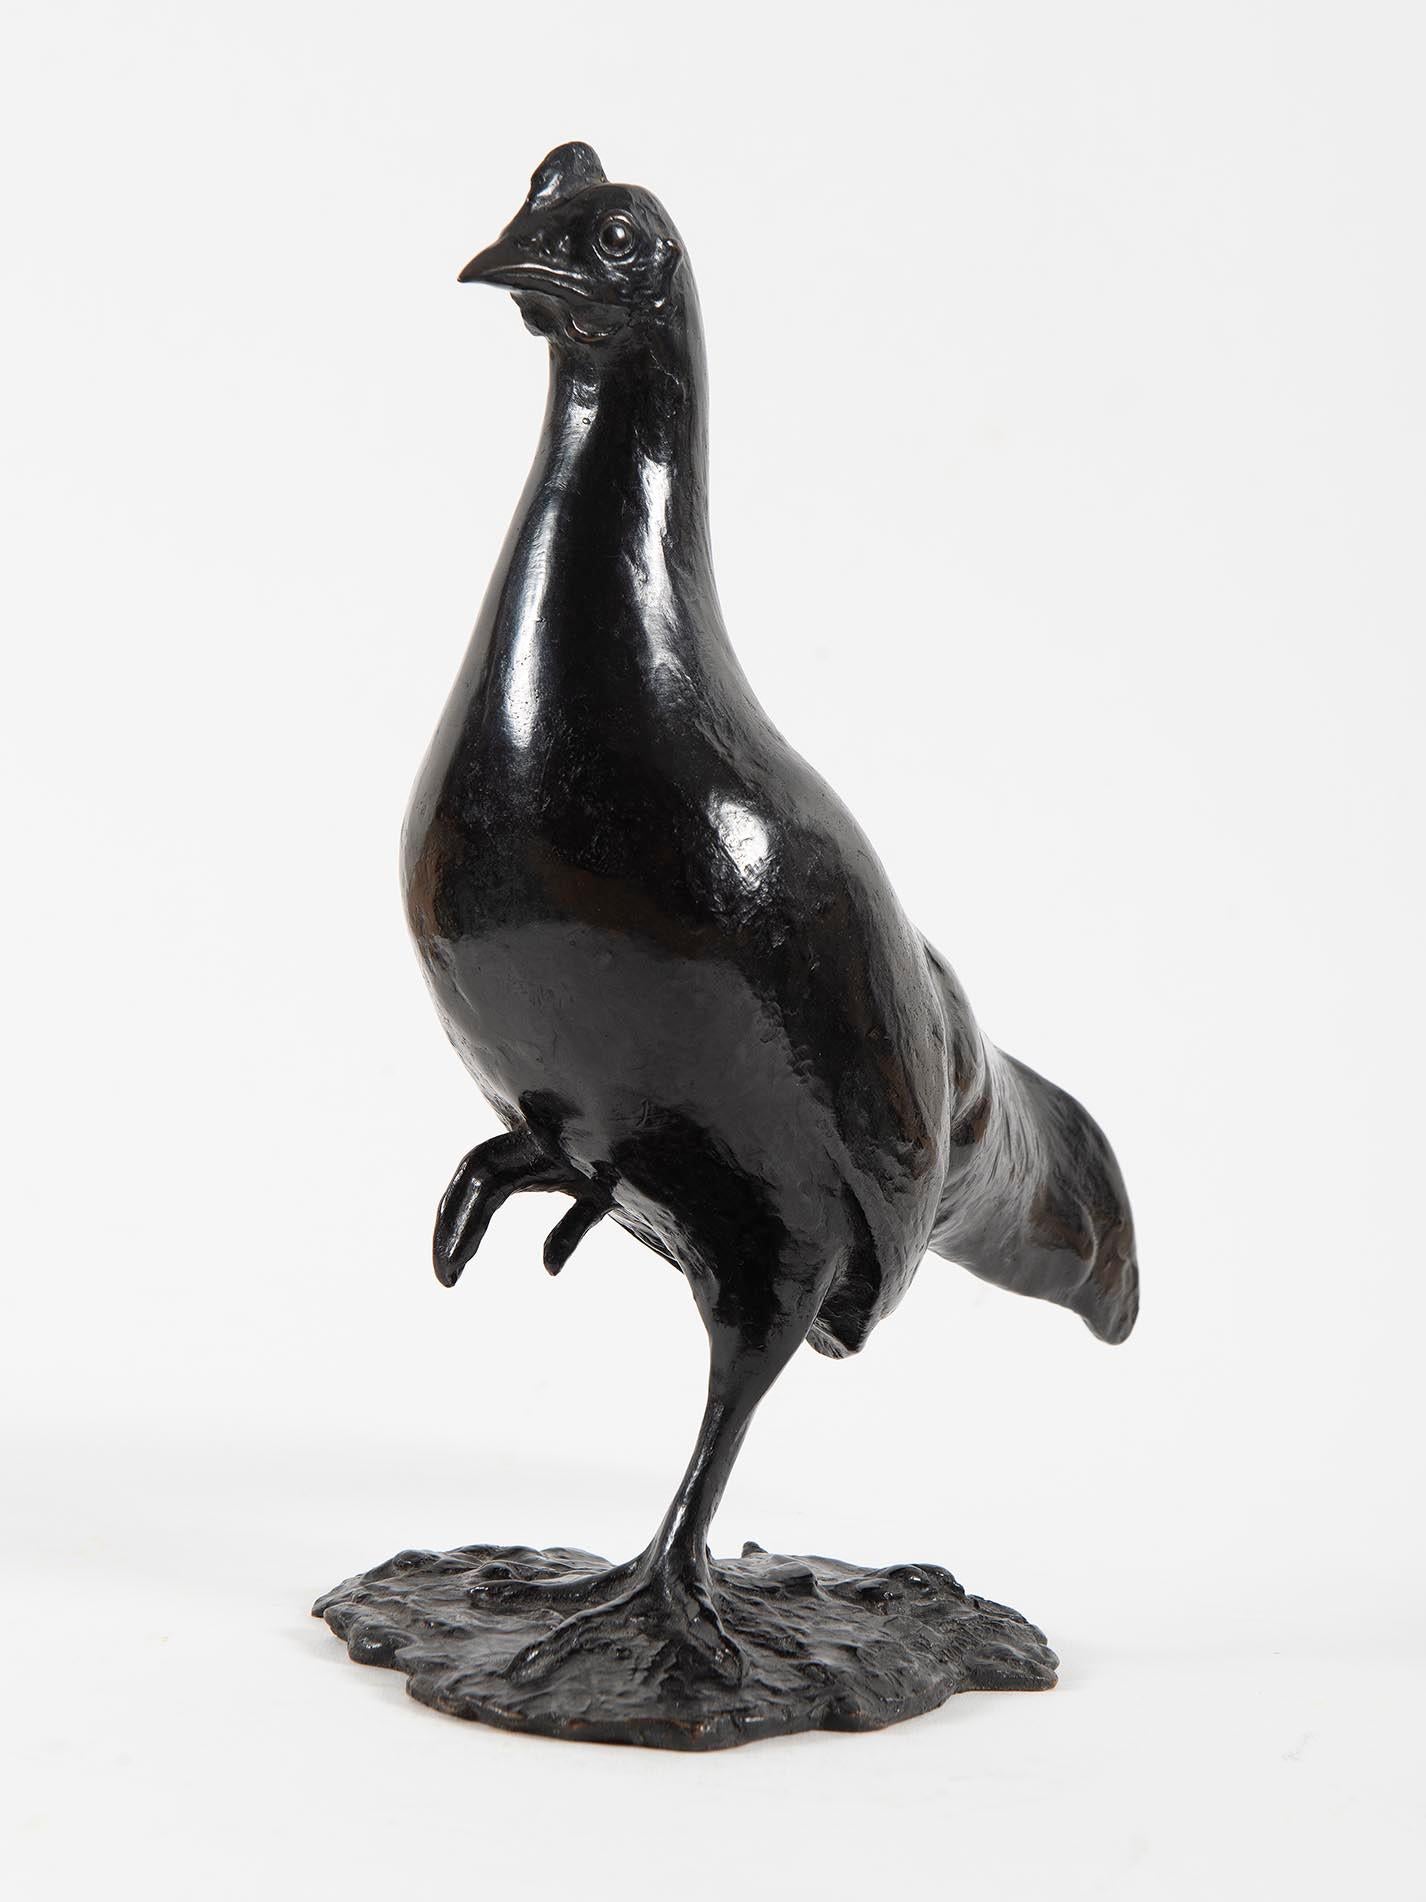 Poule cayenne - Poule faisanne, 1st proof, 1906
Bronze with a black patina
28 x 22 13 cm
Signed on the base : POMPON. Seal of the founder Cire Perdue A.A. Hebrard. Numbered (M)
Certificate of authenticity issued by Liliane Colas.

Provenance :